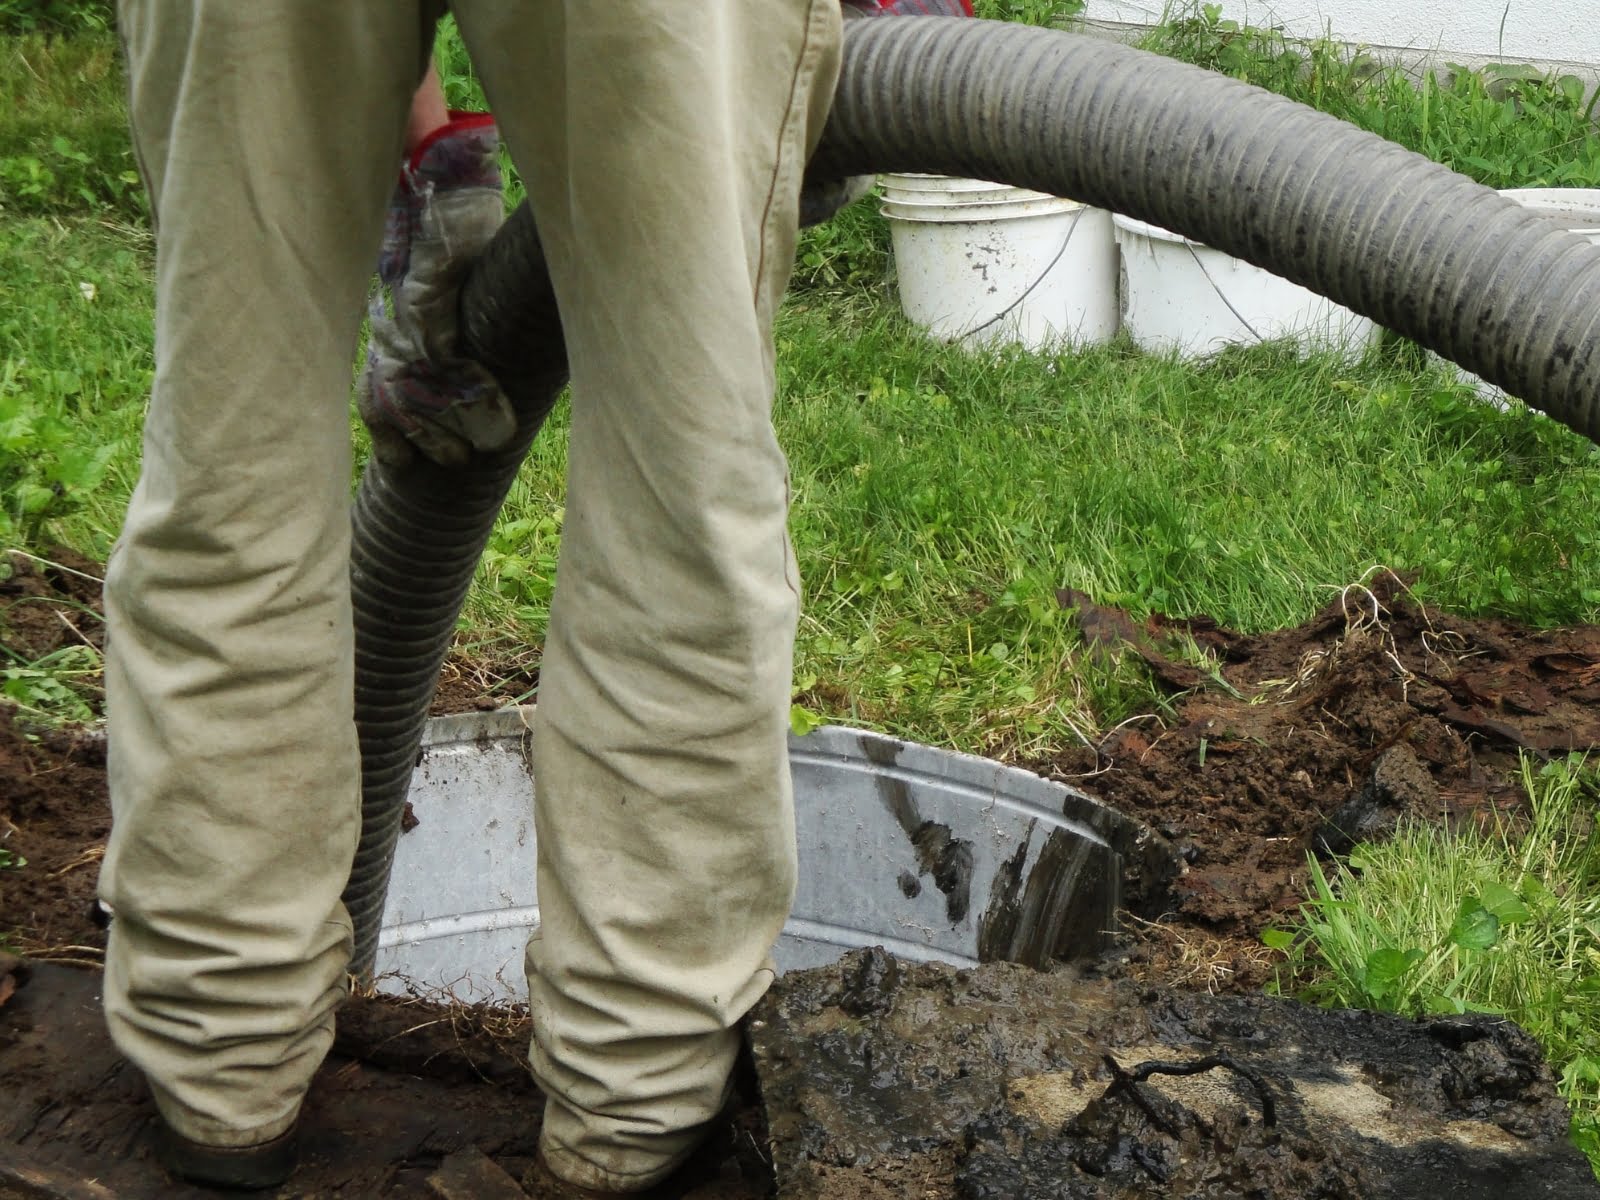 A man performing septic tank maintenance in a yard.